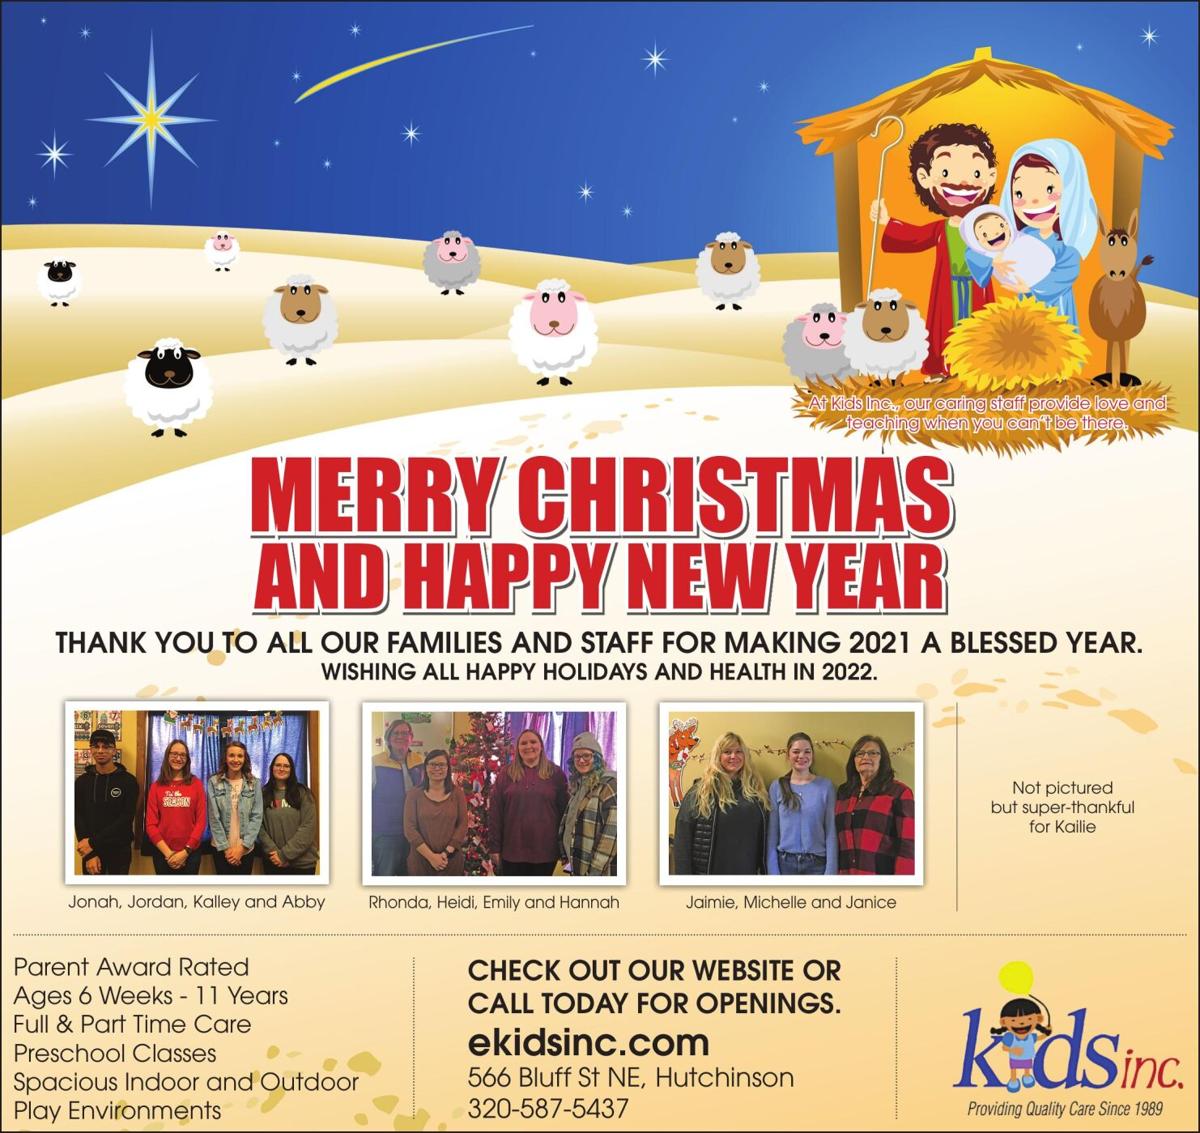 At Kids Inc., our caring staff provide